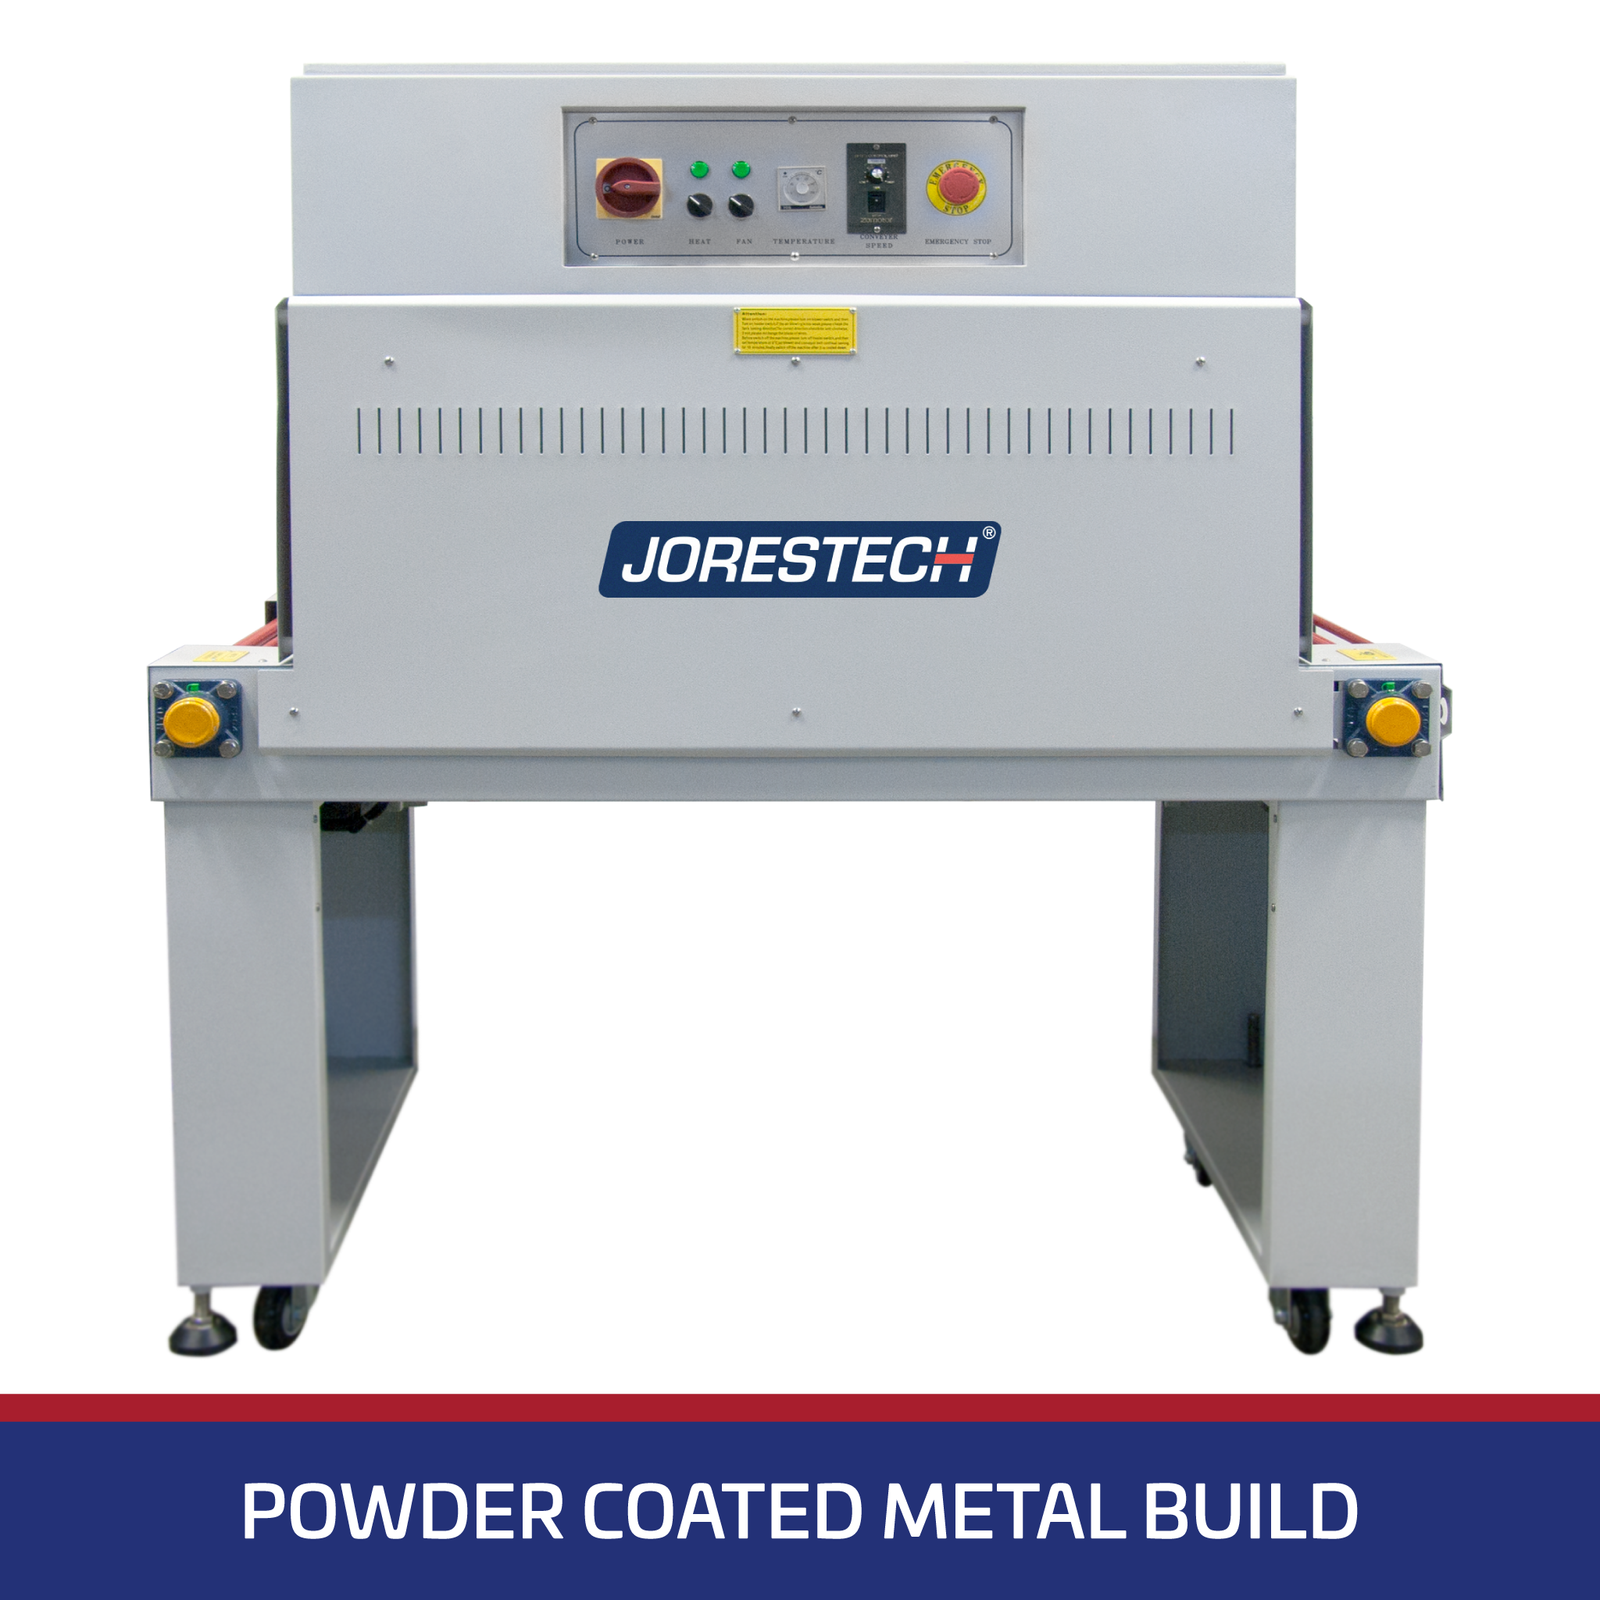 JORESTECH Shrink wrapping heat tunnel machine shown in a frontal view over white background. There’s a white text over blue background that reads “Powder Coated Metal Build”